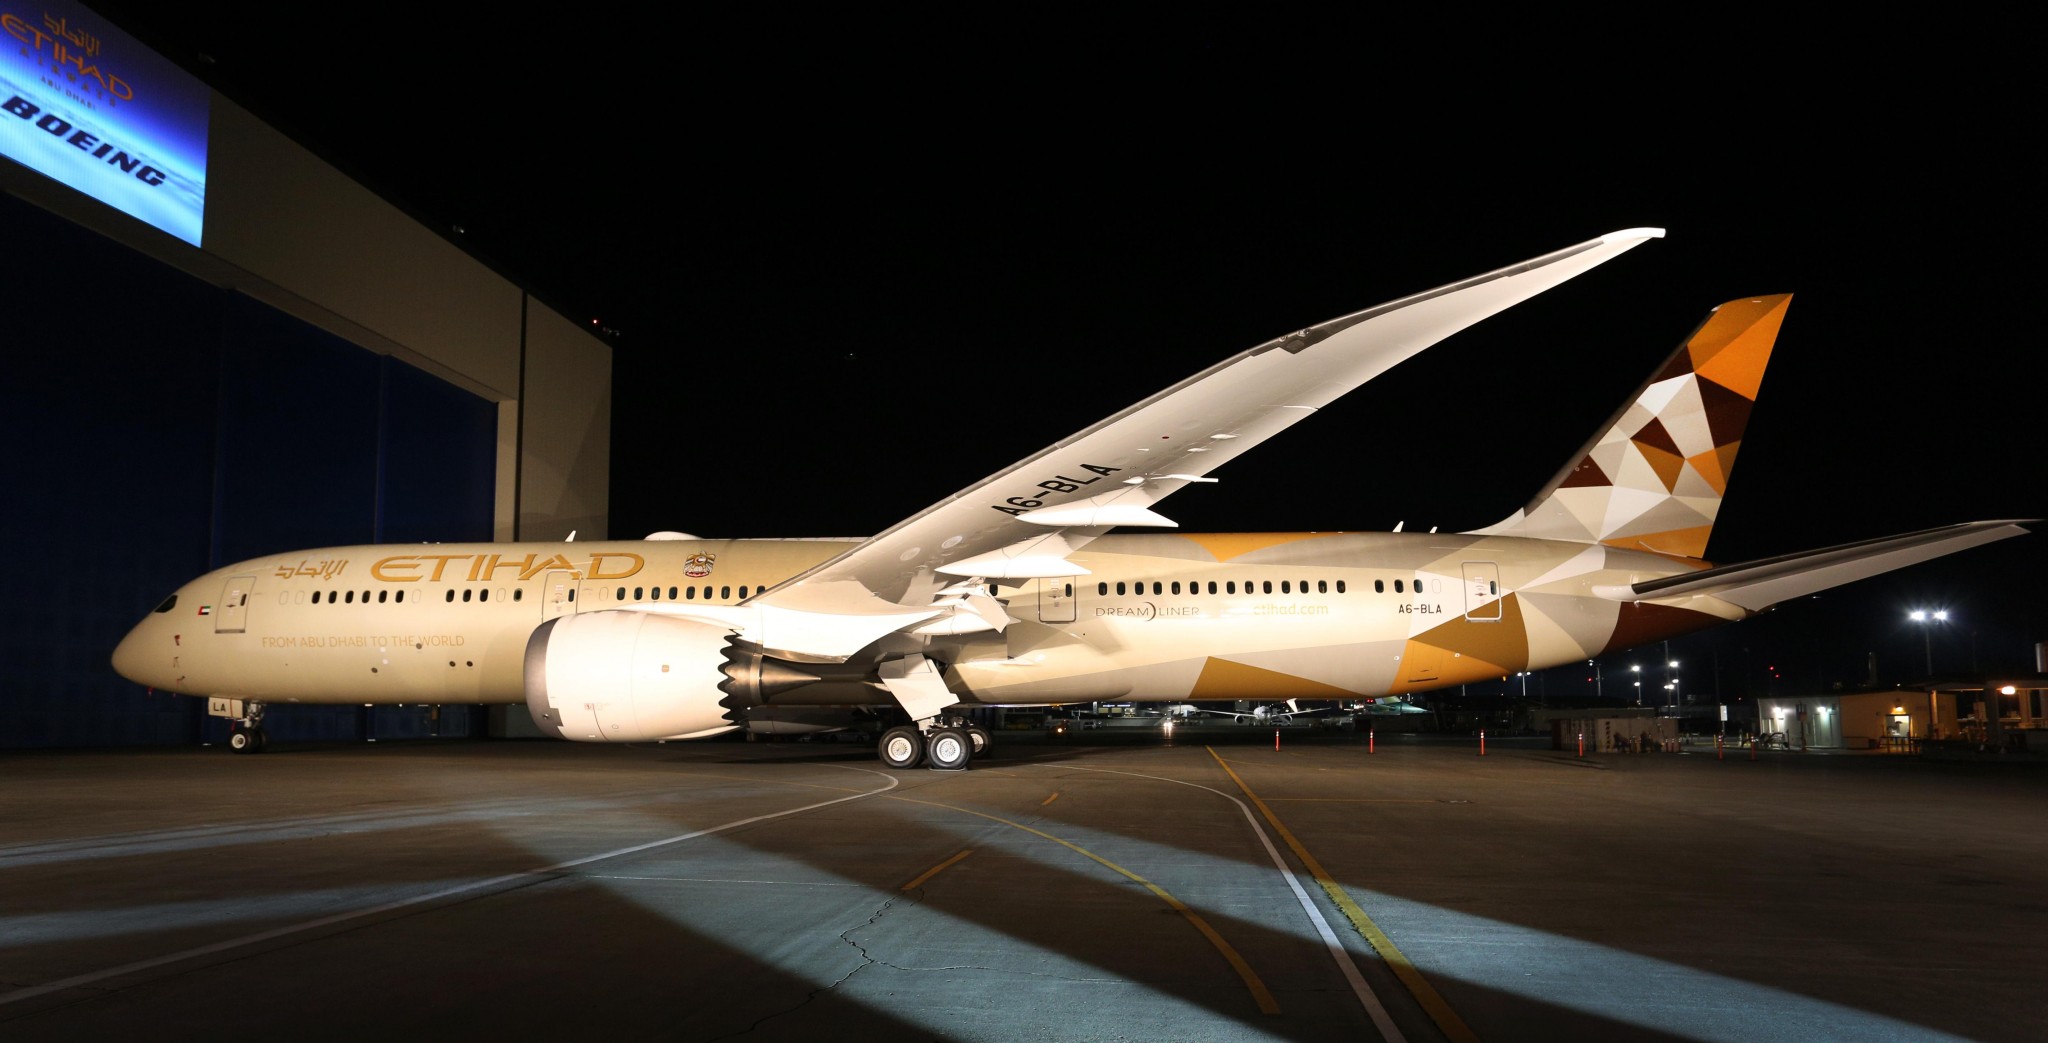 Etihad Airways’ 787 commences daily services into Amman